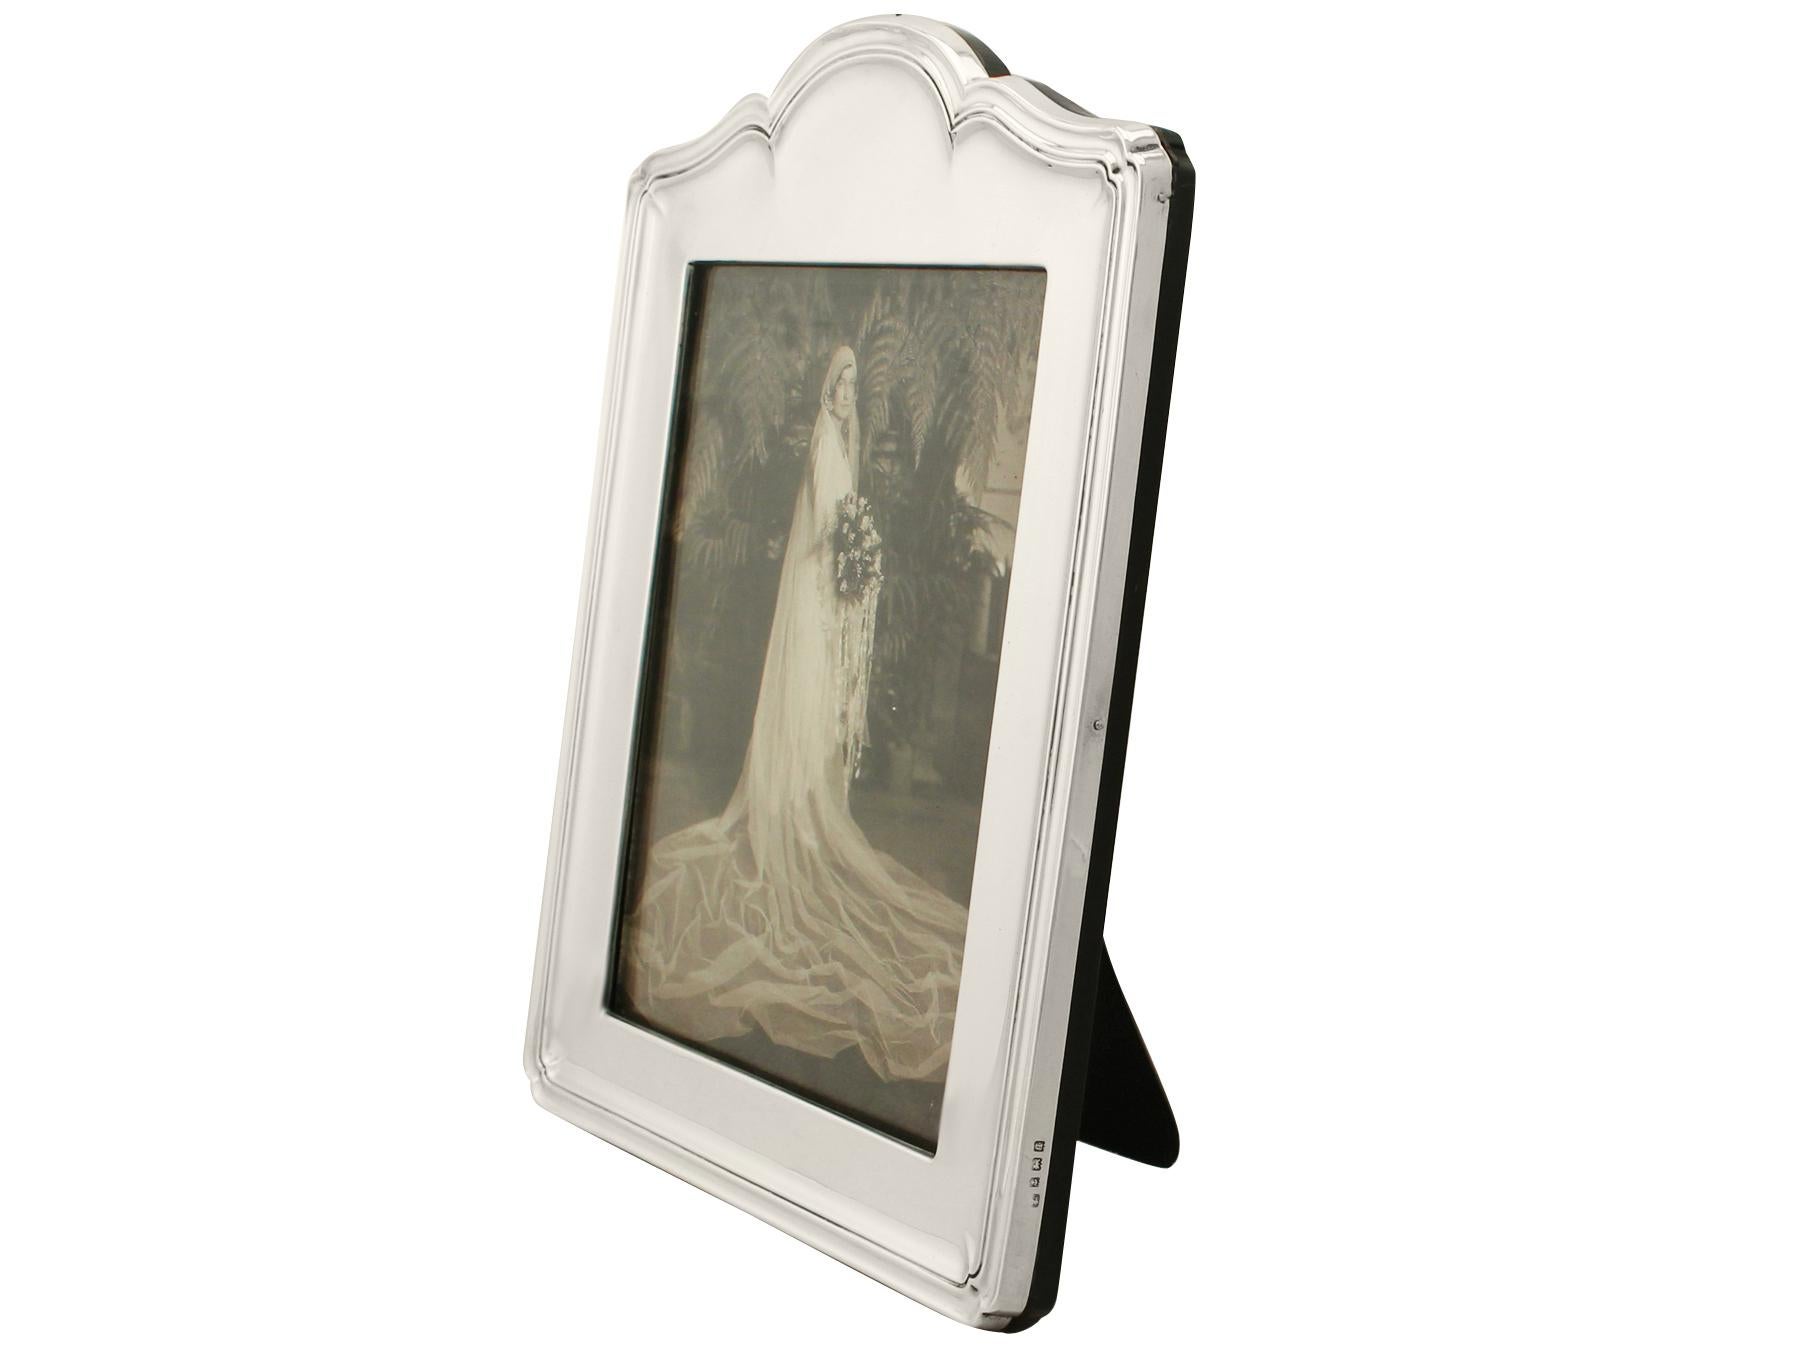 A fine and impressive, large antique George V English sterling silver photograph frame, an addition to our ornamental silverware collection.

This fine antique George V sterling silver photograph frame has a rounded rectangular form with an